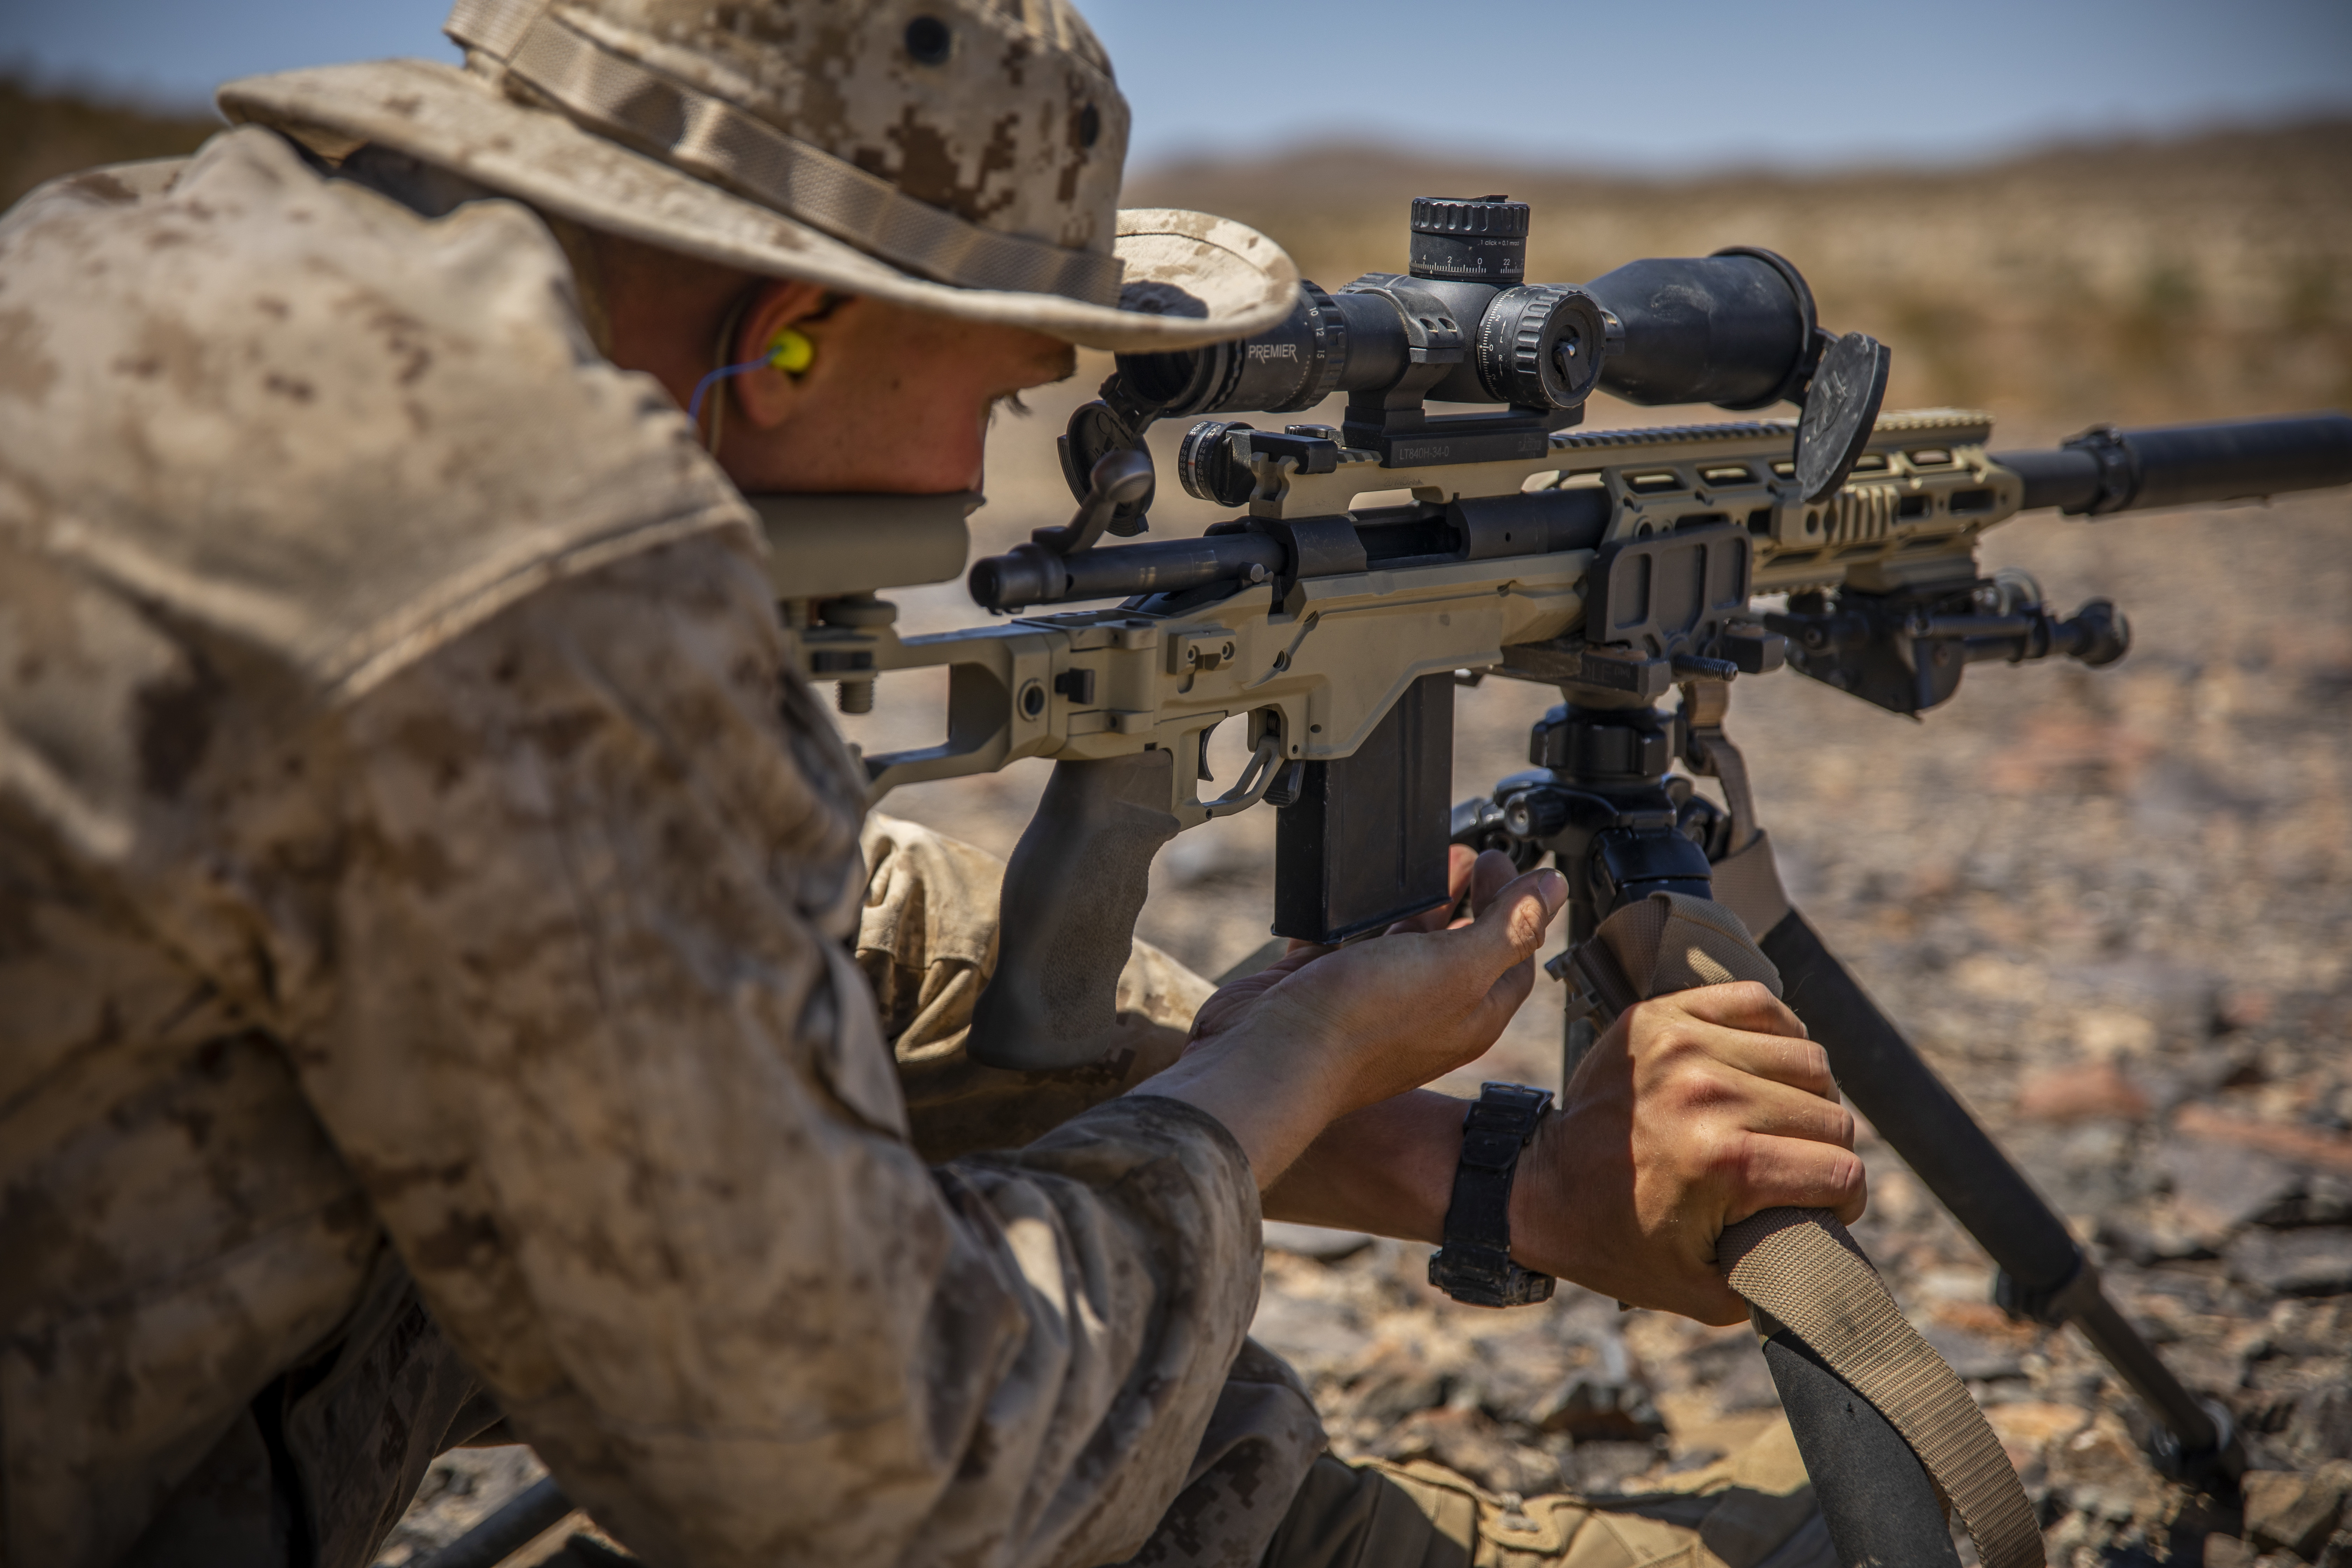 The Marine Corps is getting rid of Scout Snipers - Task & Purpose